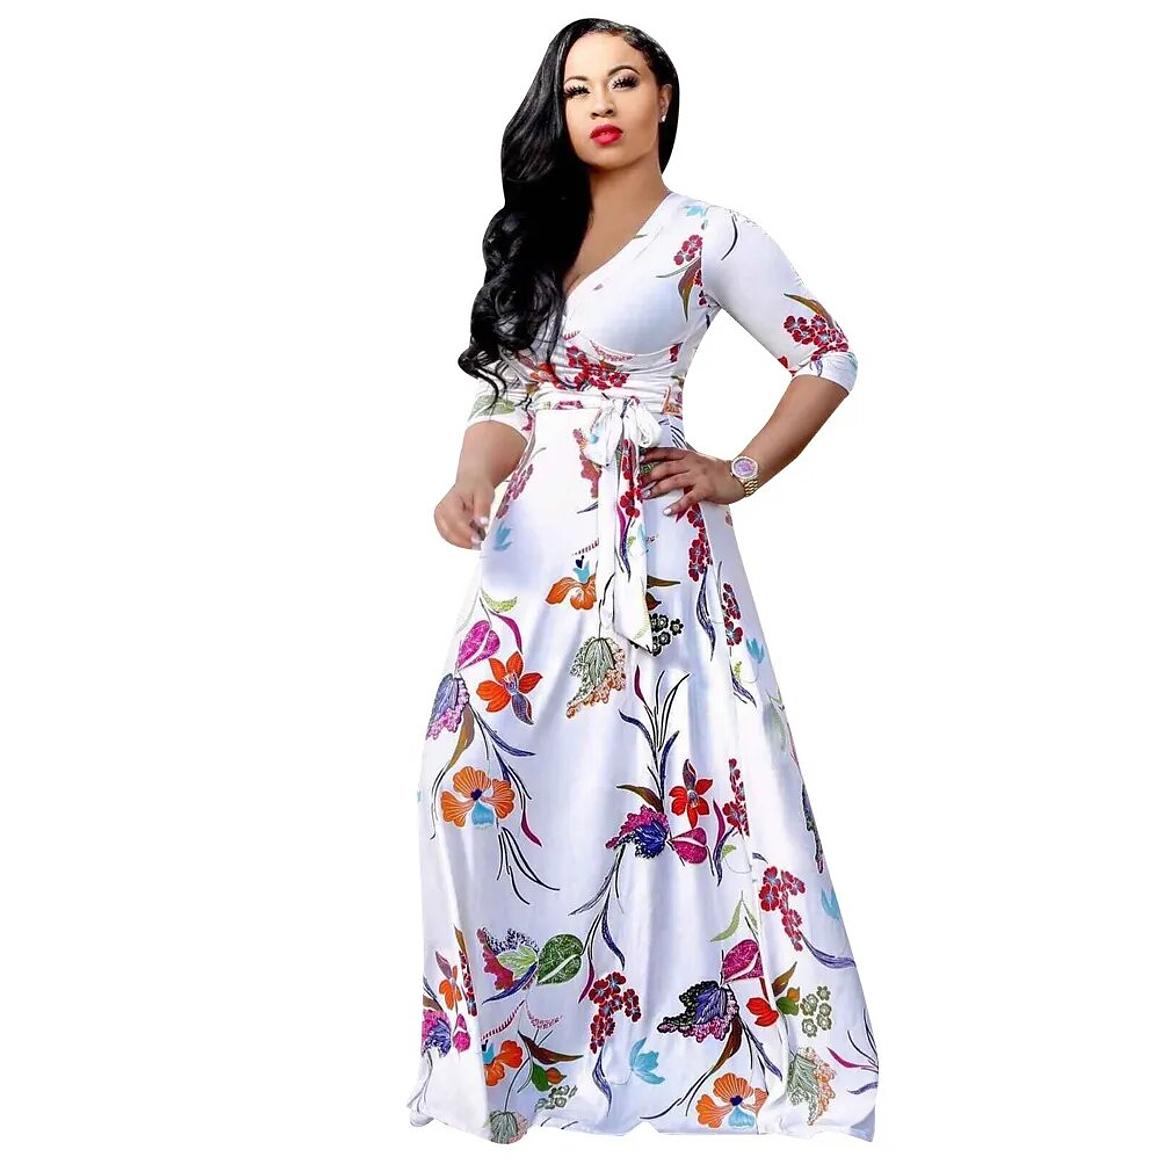 White Floral V-neck Full Length Maxi Dress with Belt - Available in Sizes S -3XL